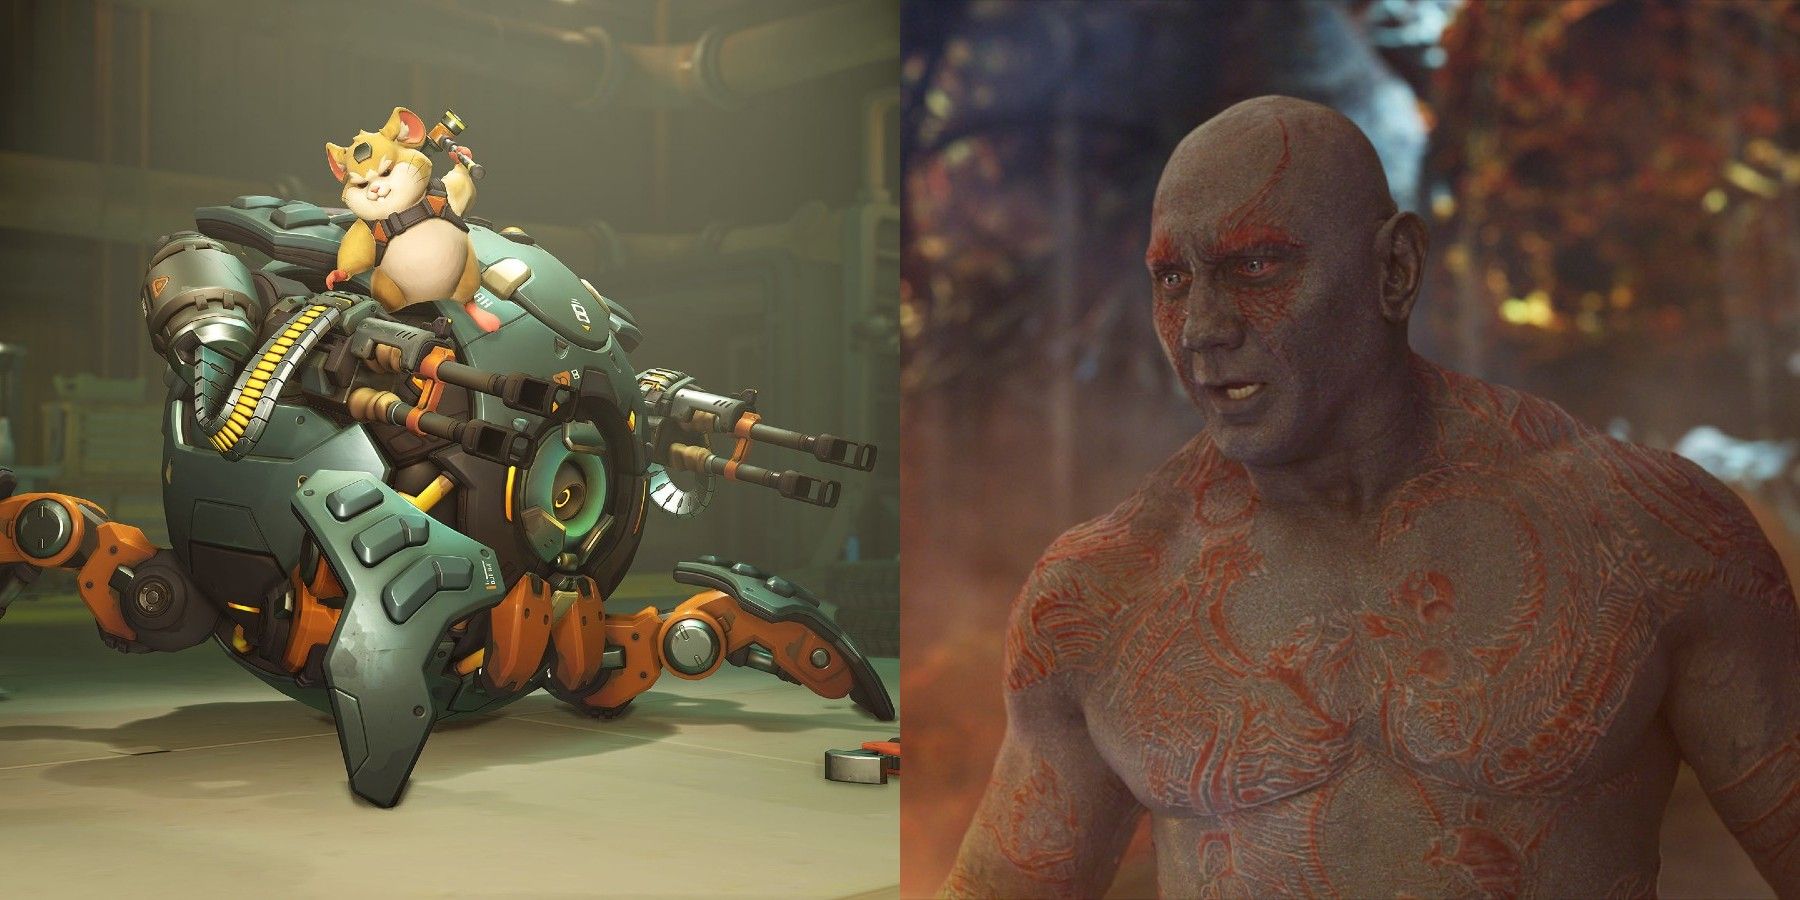 Hilarious Overwatch Clip Shows Wrecking Ball Player Copying Move From Marvel’s Drax